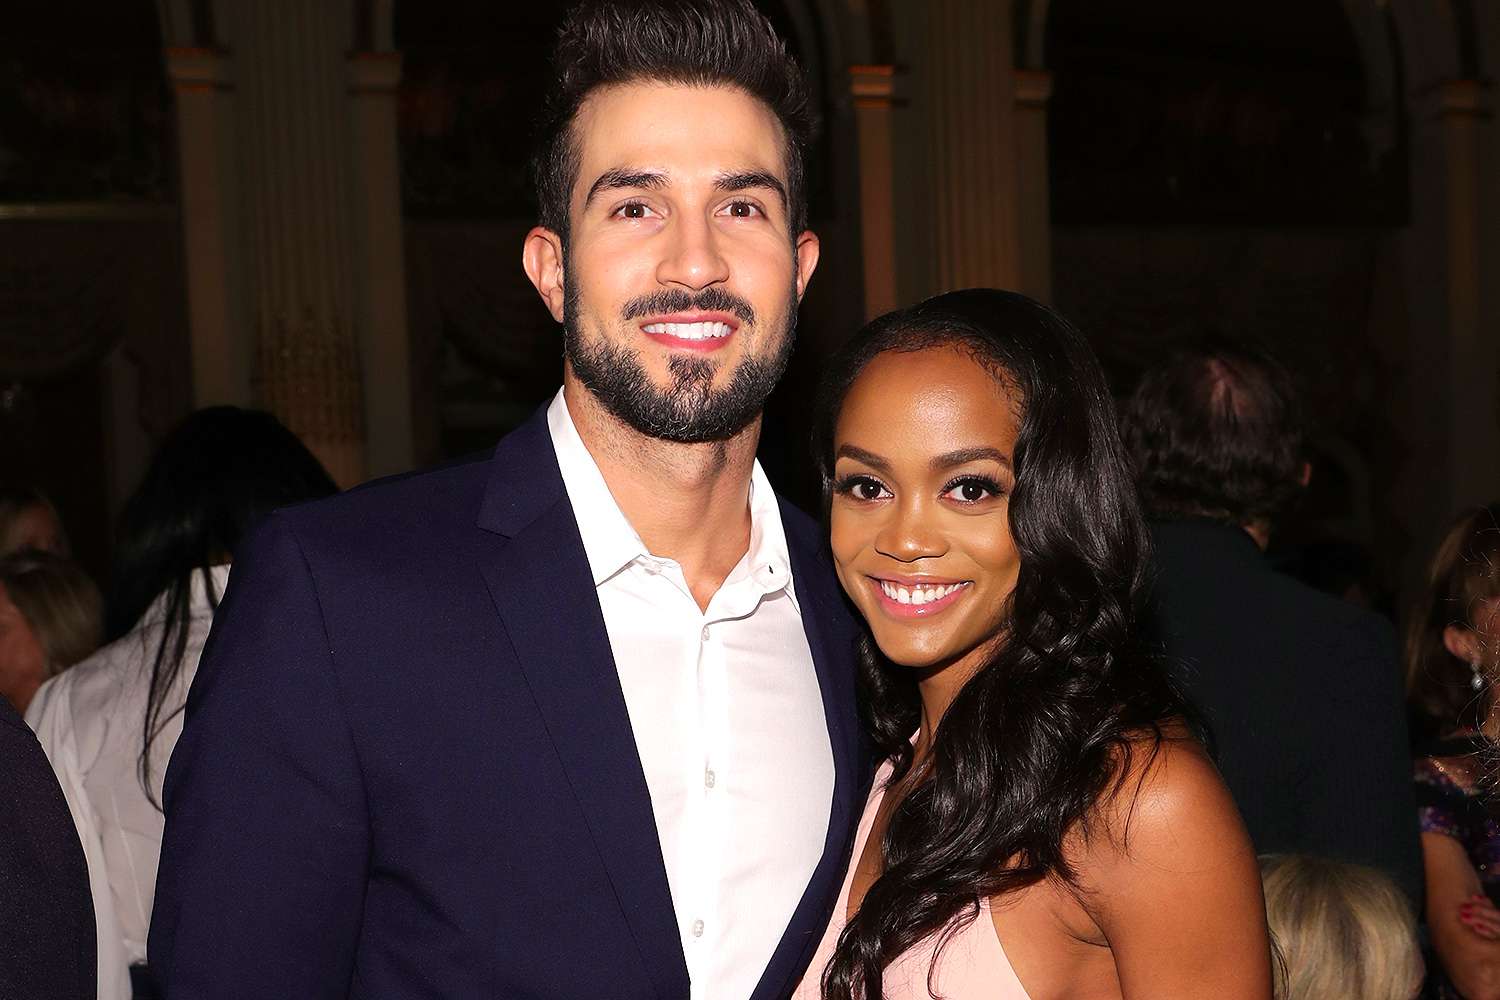 Bryan Abasolo Thanks His Divorce Coach for Helping Him Face Alleged 'PR Tricks and Gaslighting' amid Separation from Rachel Lindsay